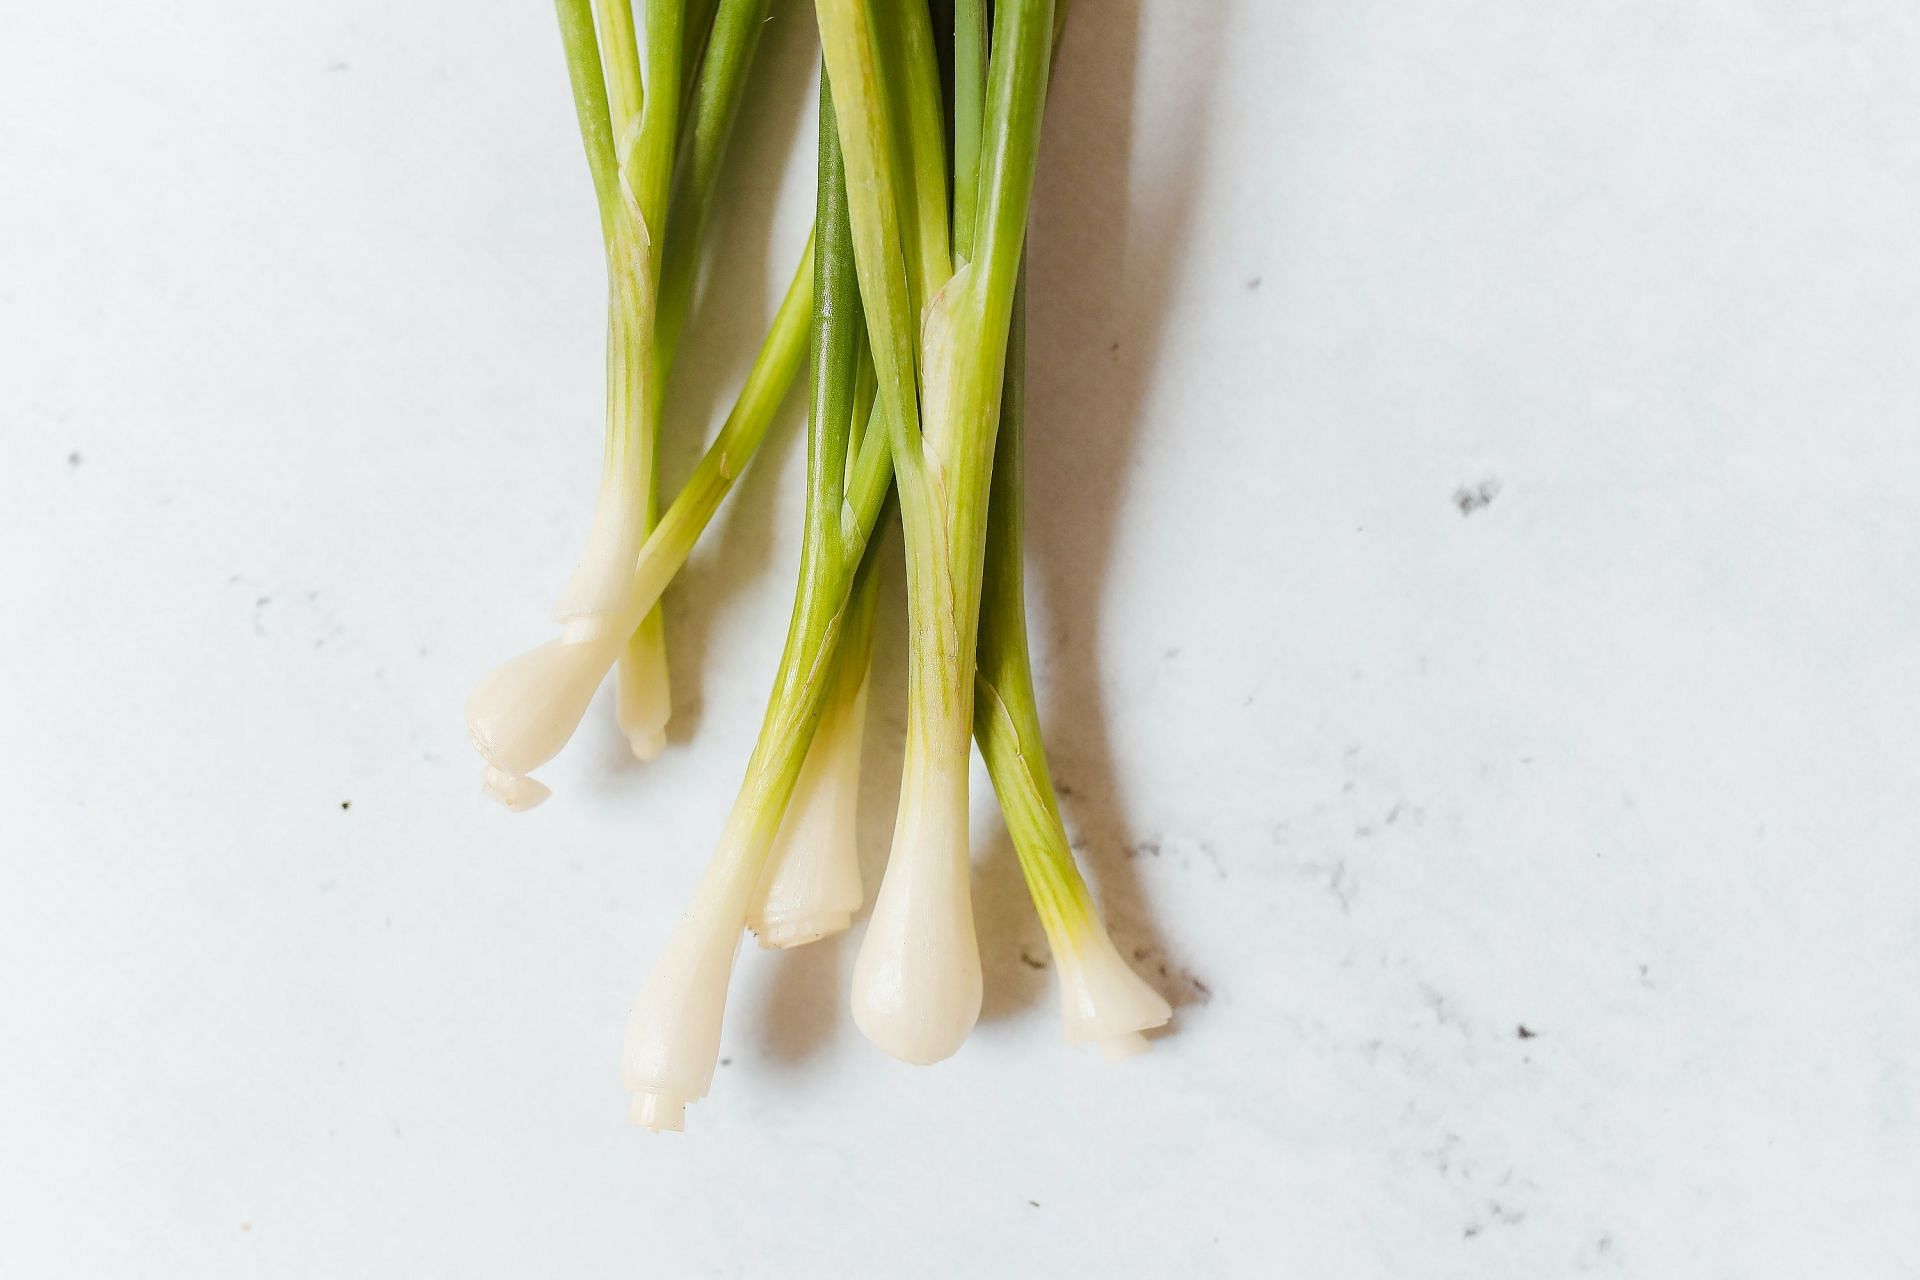 Quercetin, flavonoids and vitamins present in spring onions fight against inflammation (Image via Pexels @Polina Tankilevitch)